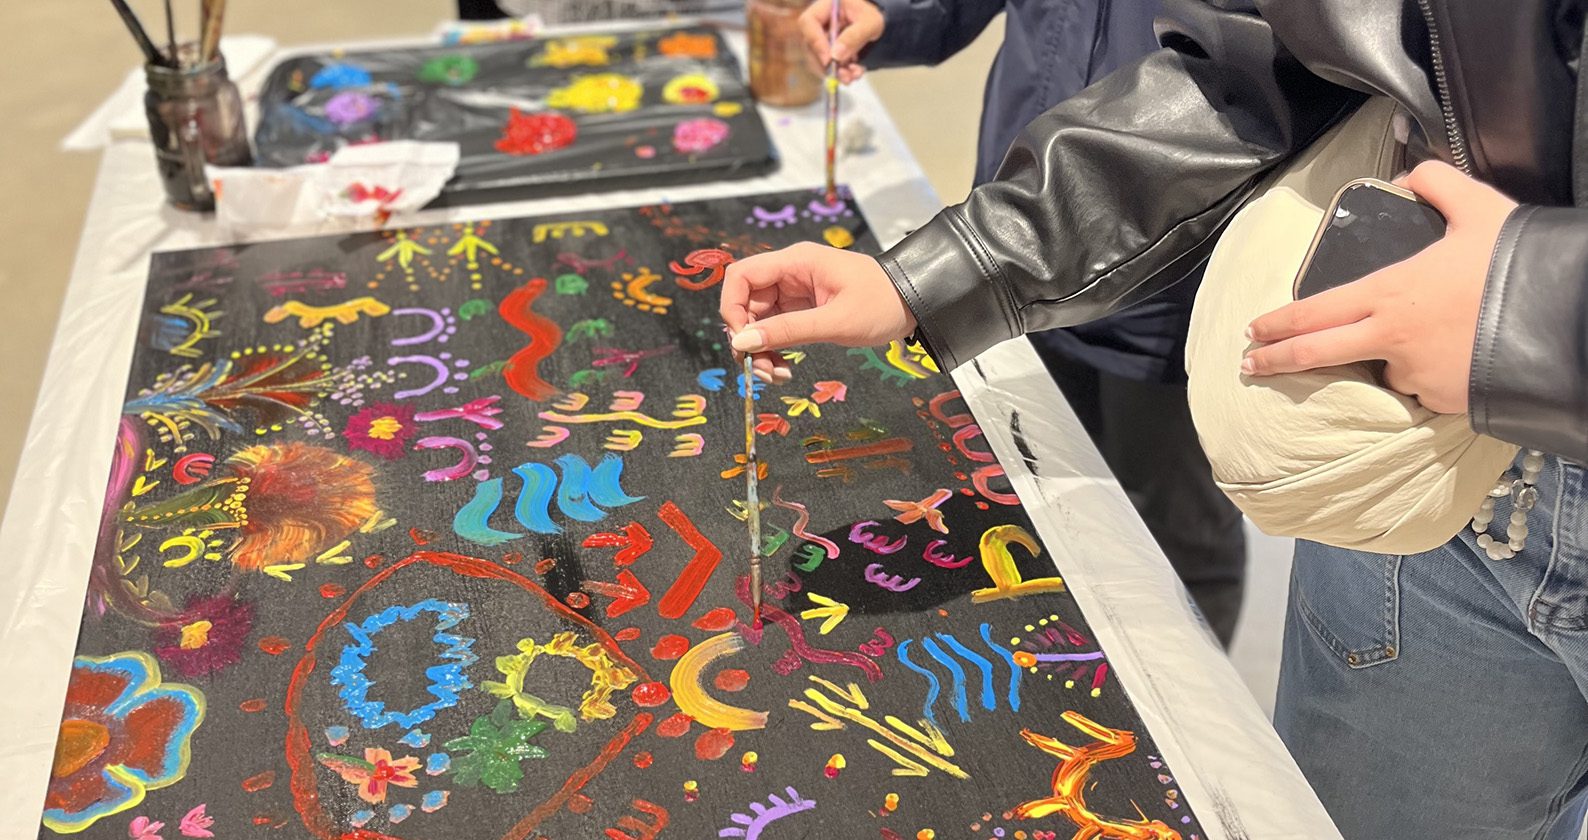 A close up view of students completing their collaborative artwork piece.